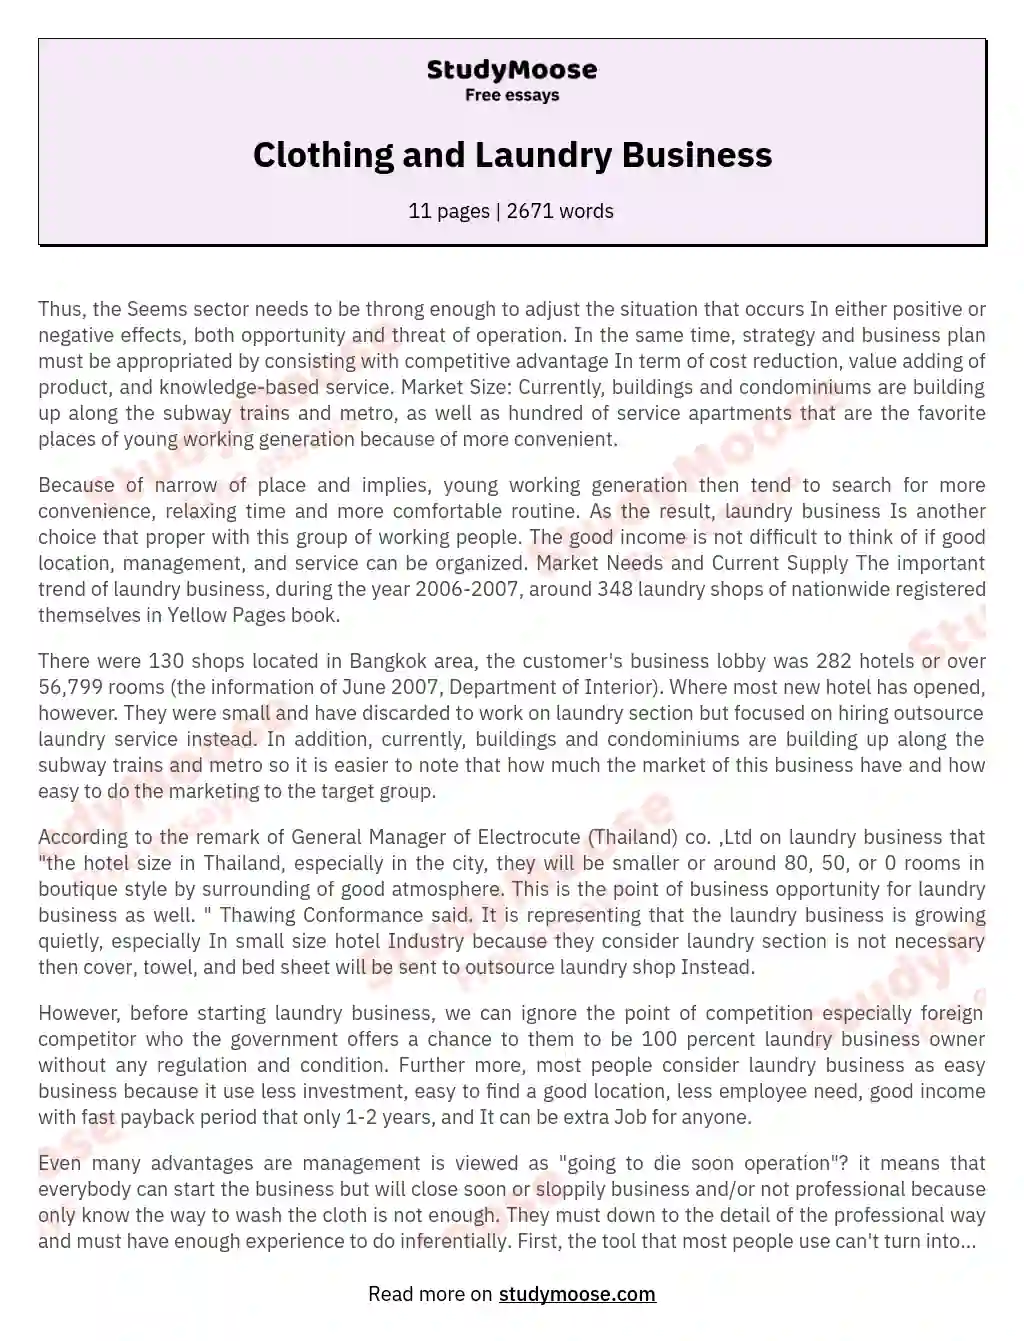 Clothing and Laundry Business essay